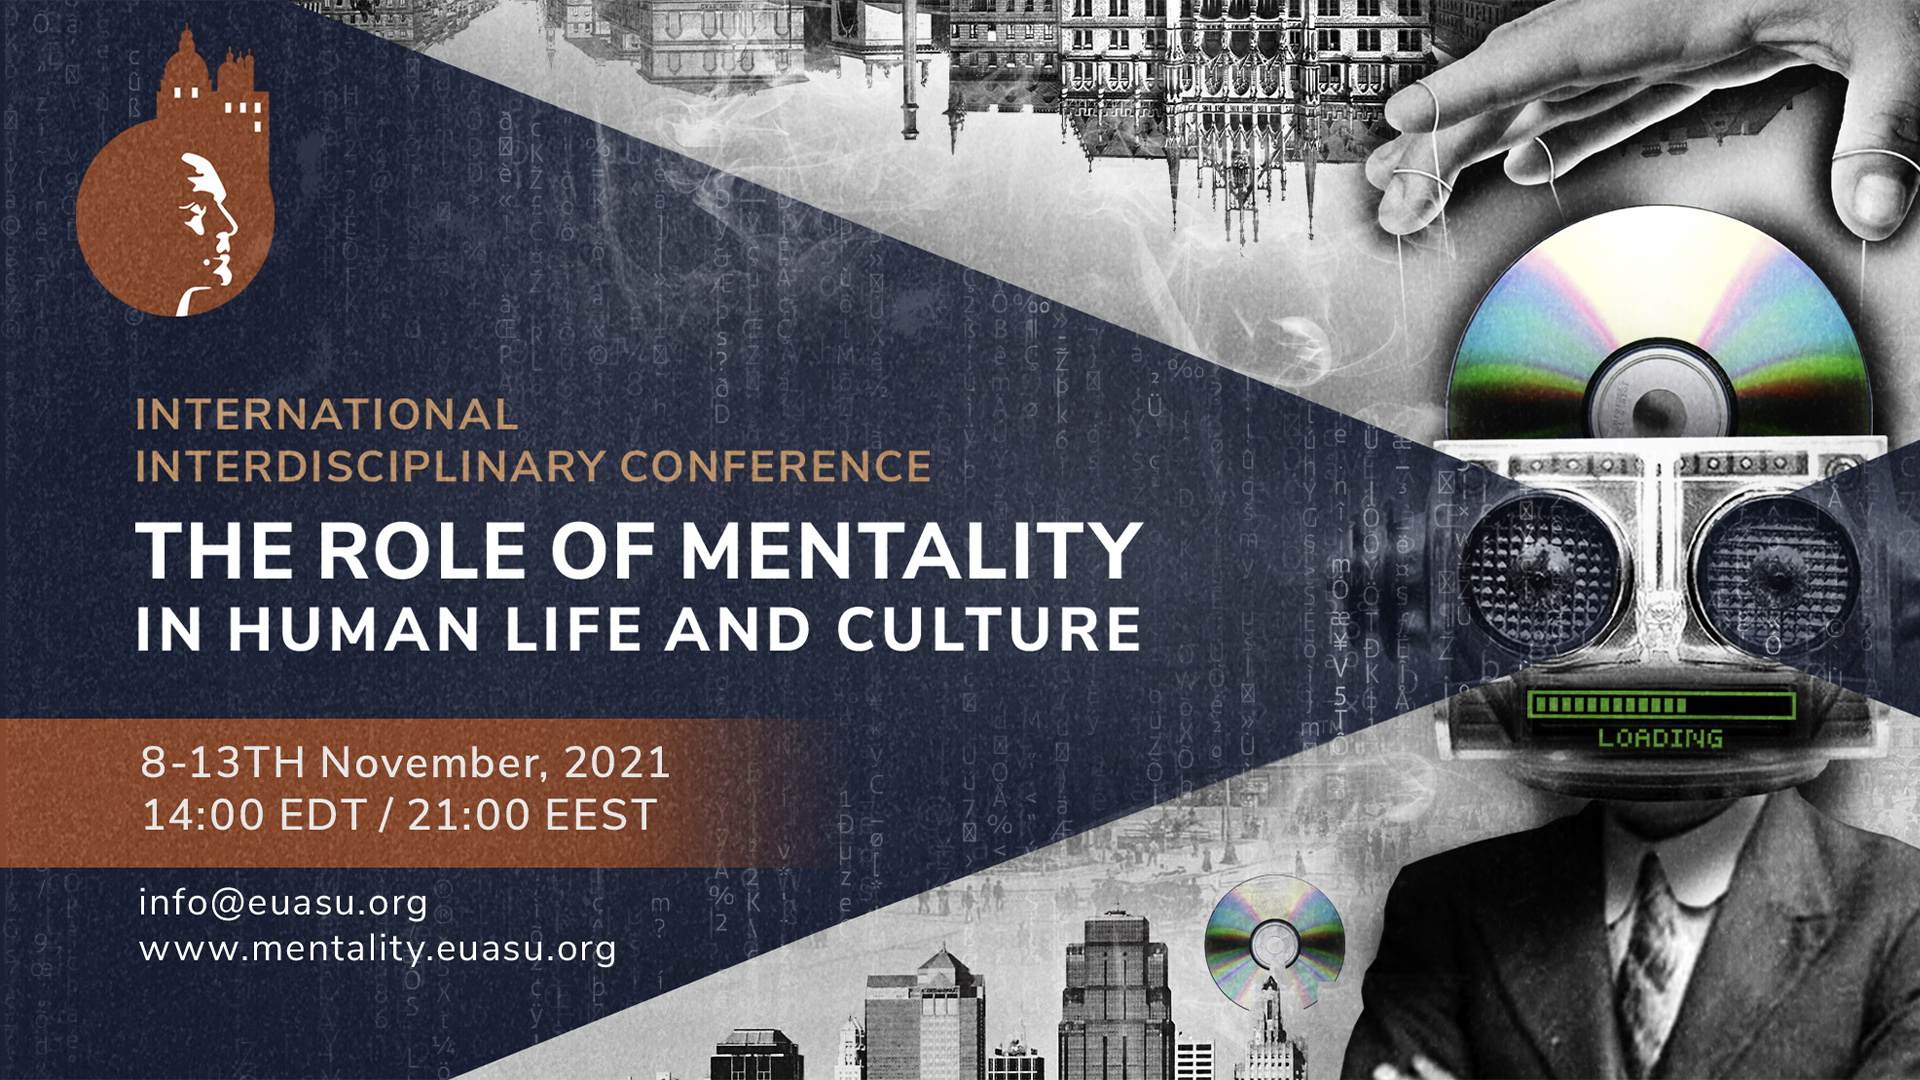 The international interdisciplinary conference “The role of mentality